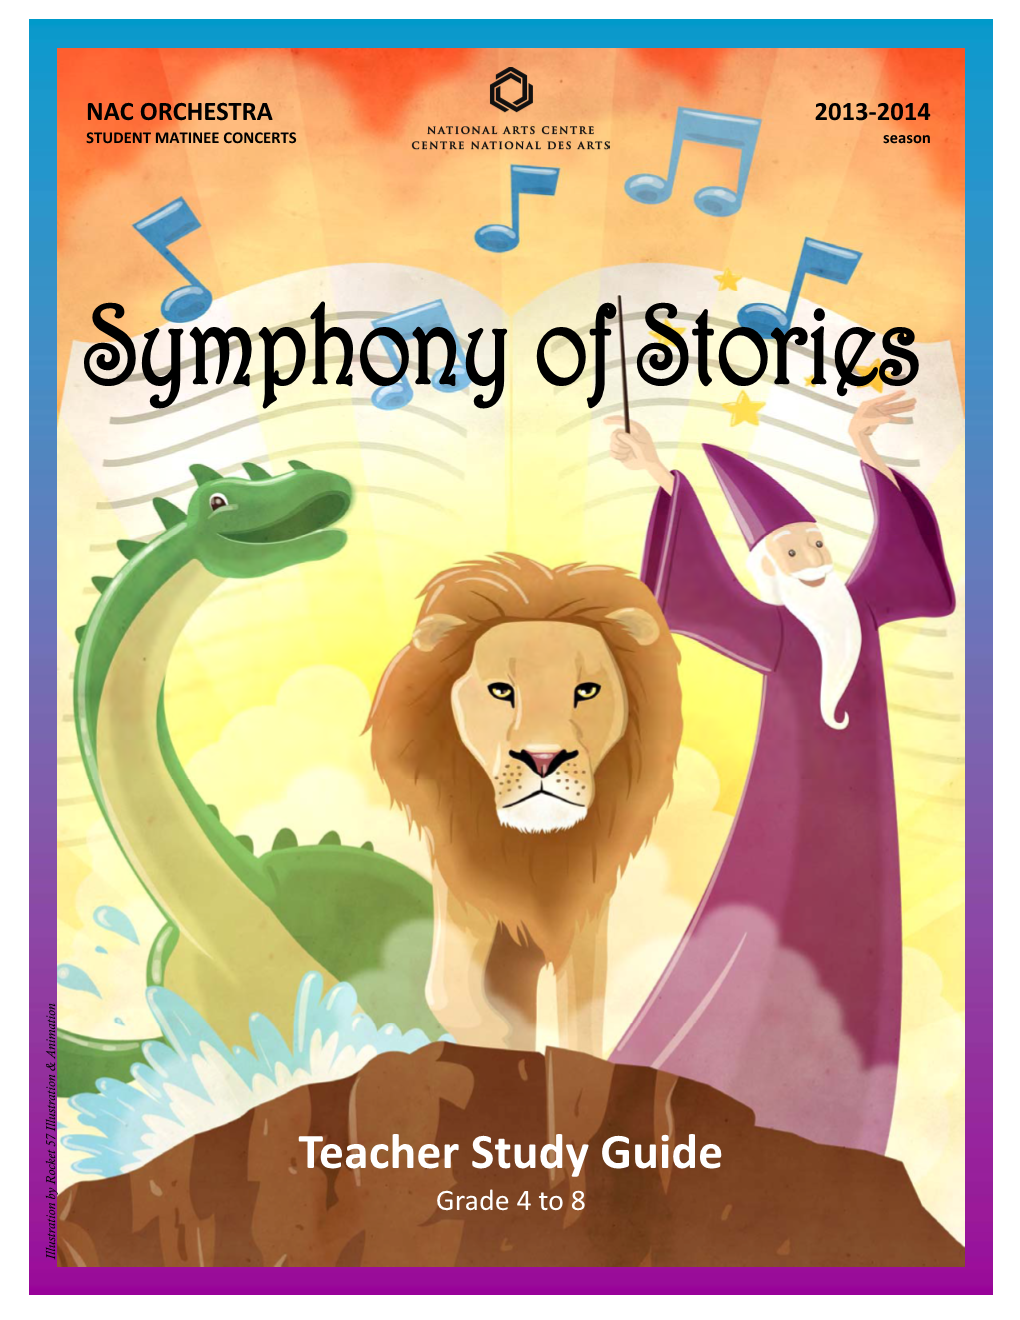 Teacher Study Guide Grade 4 to 8 Illustration by Rocket 57 Illustration & Animation Teacher Study Guide 2 Symphony of Stories Table of Contents